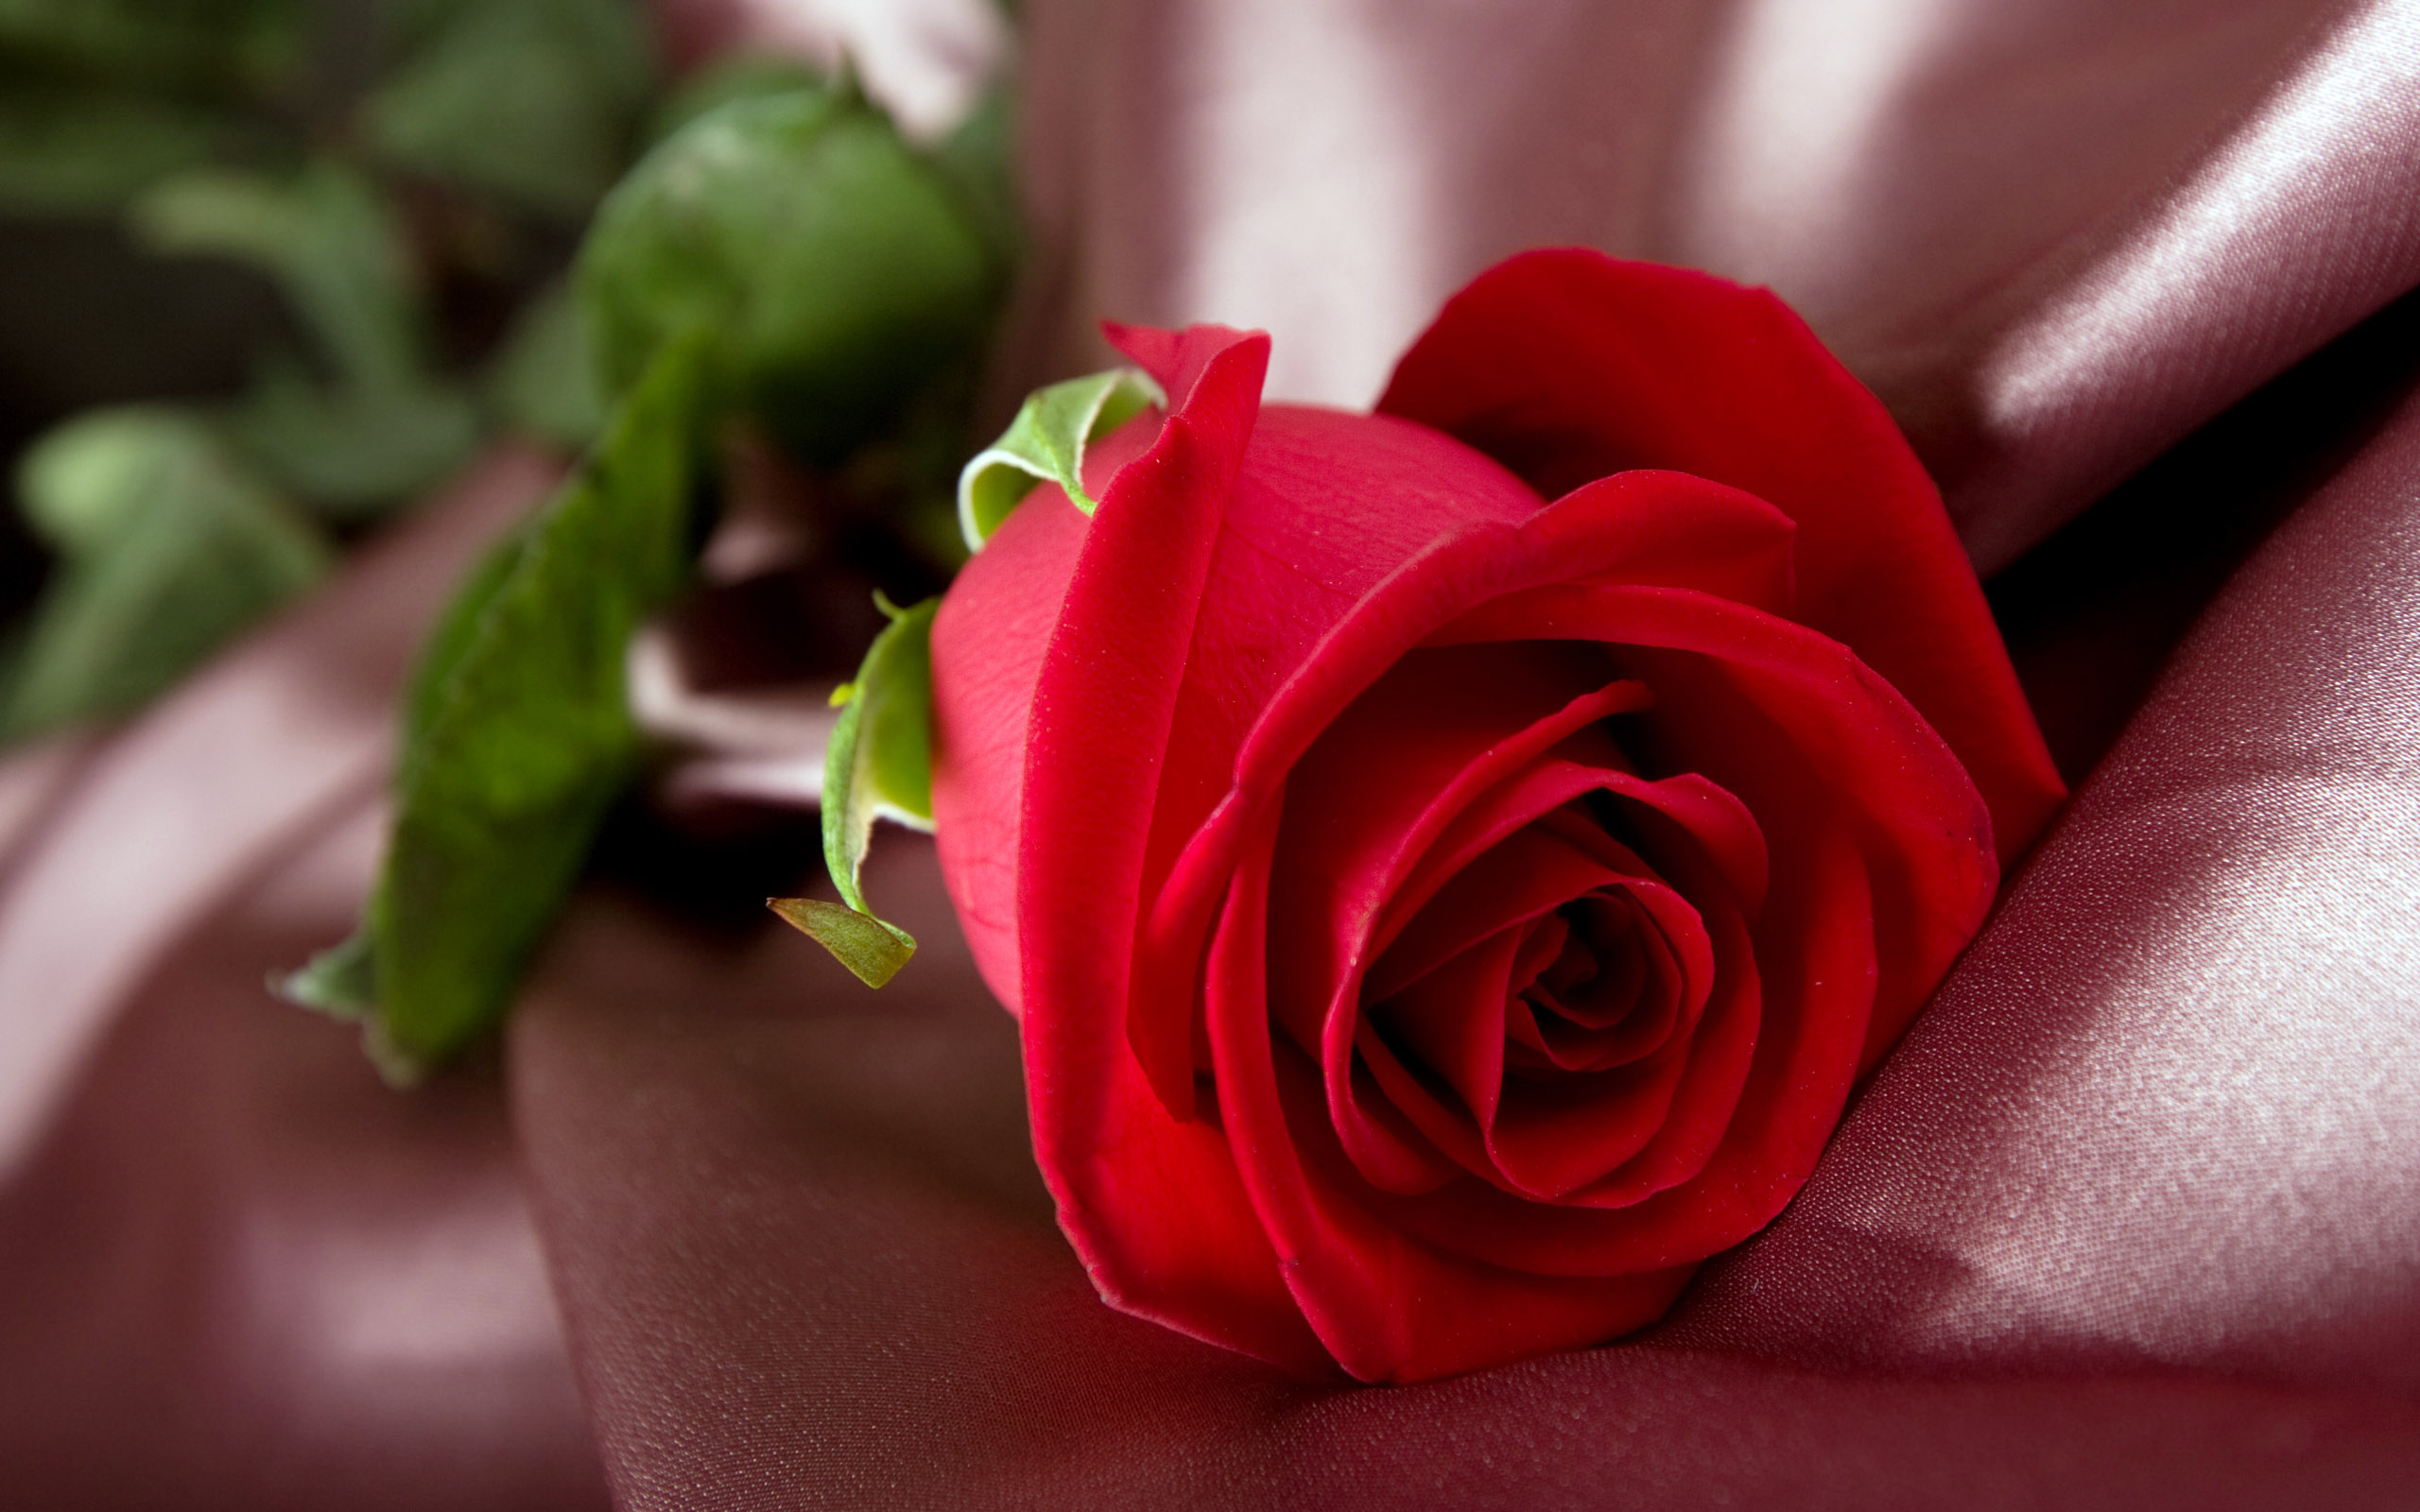 Awesome Red Rose Flower Macro Wallpaper HD With